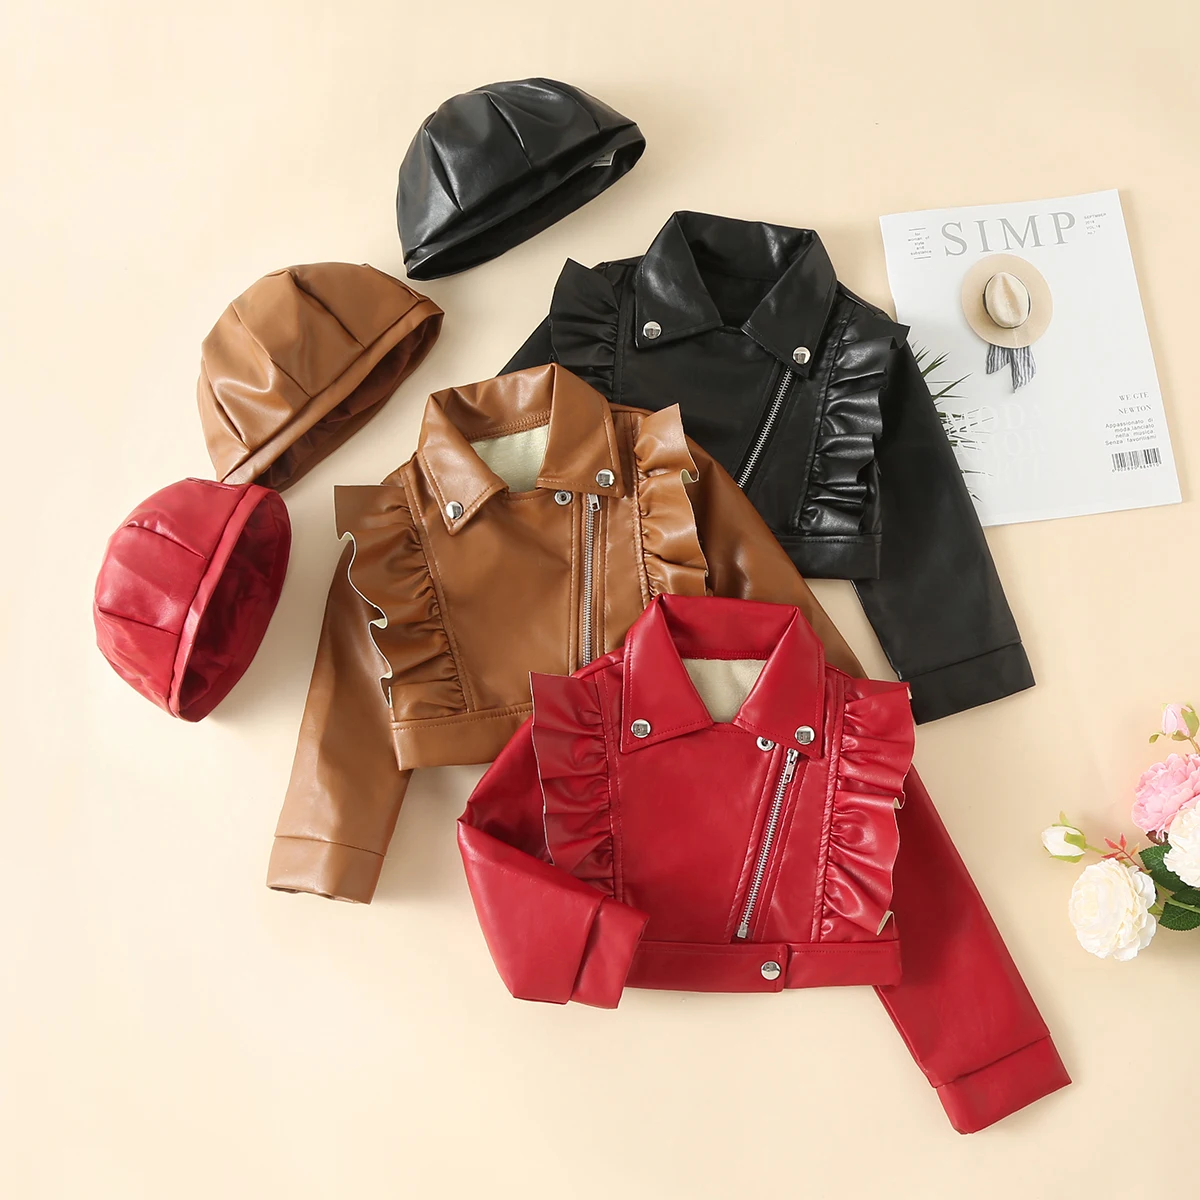 hibobi Toddler Solid Color Lapel Leather & Hat Baby Girl  Spring Autumn Winter PU Coat Fashion Leather Jackets For Kid 1-6Y